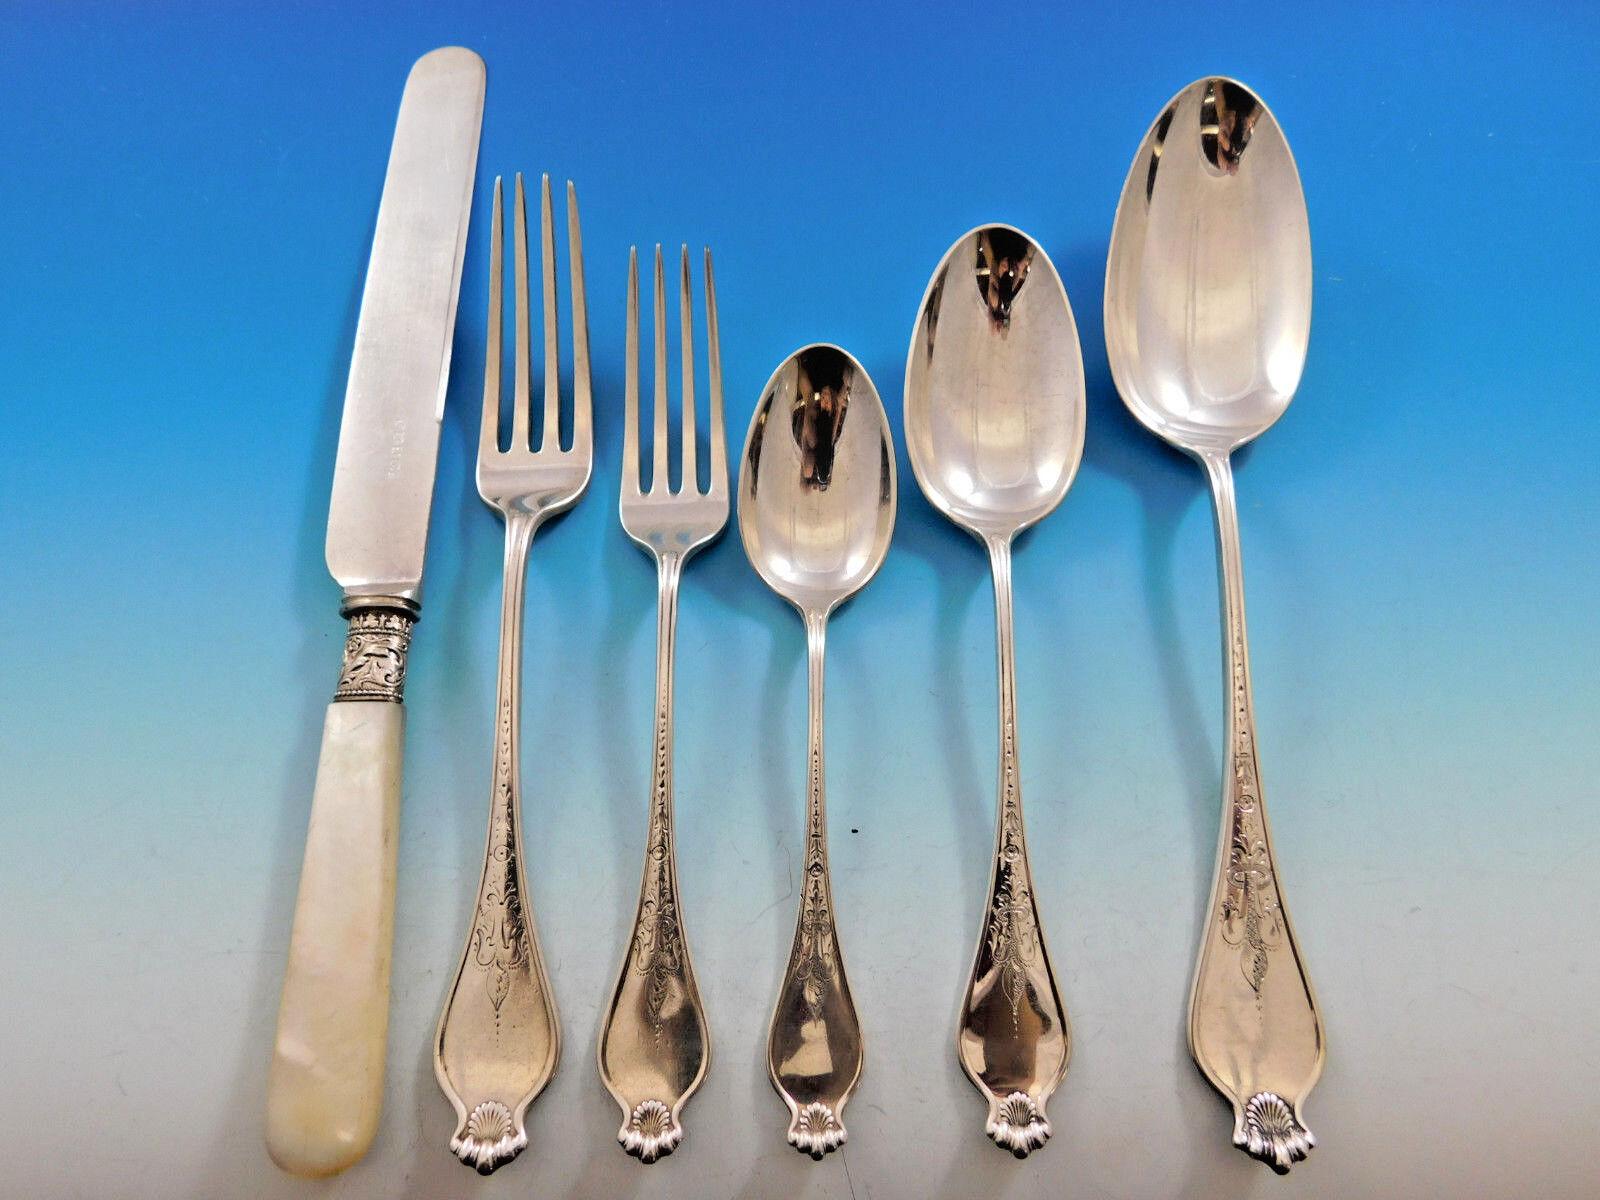 Rare Corona by Dominick & Haff circa 1885 Sterling silver Flatware set with shell motif and engraved detailing, 36 pieces (including 6 Mother of Pearl handle knives). This scarce early set includes:

6 Dinner Size Knives, 9 3/4